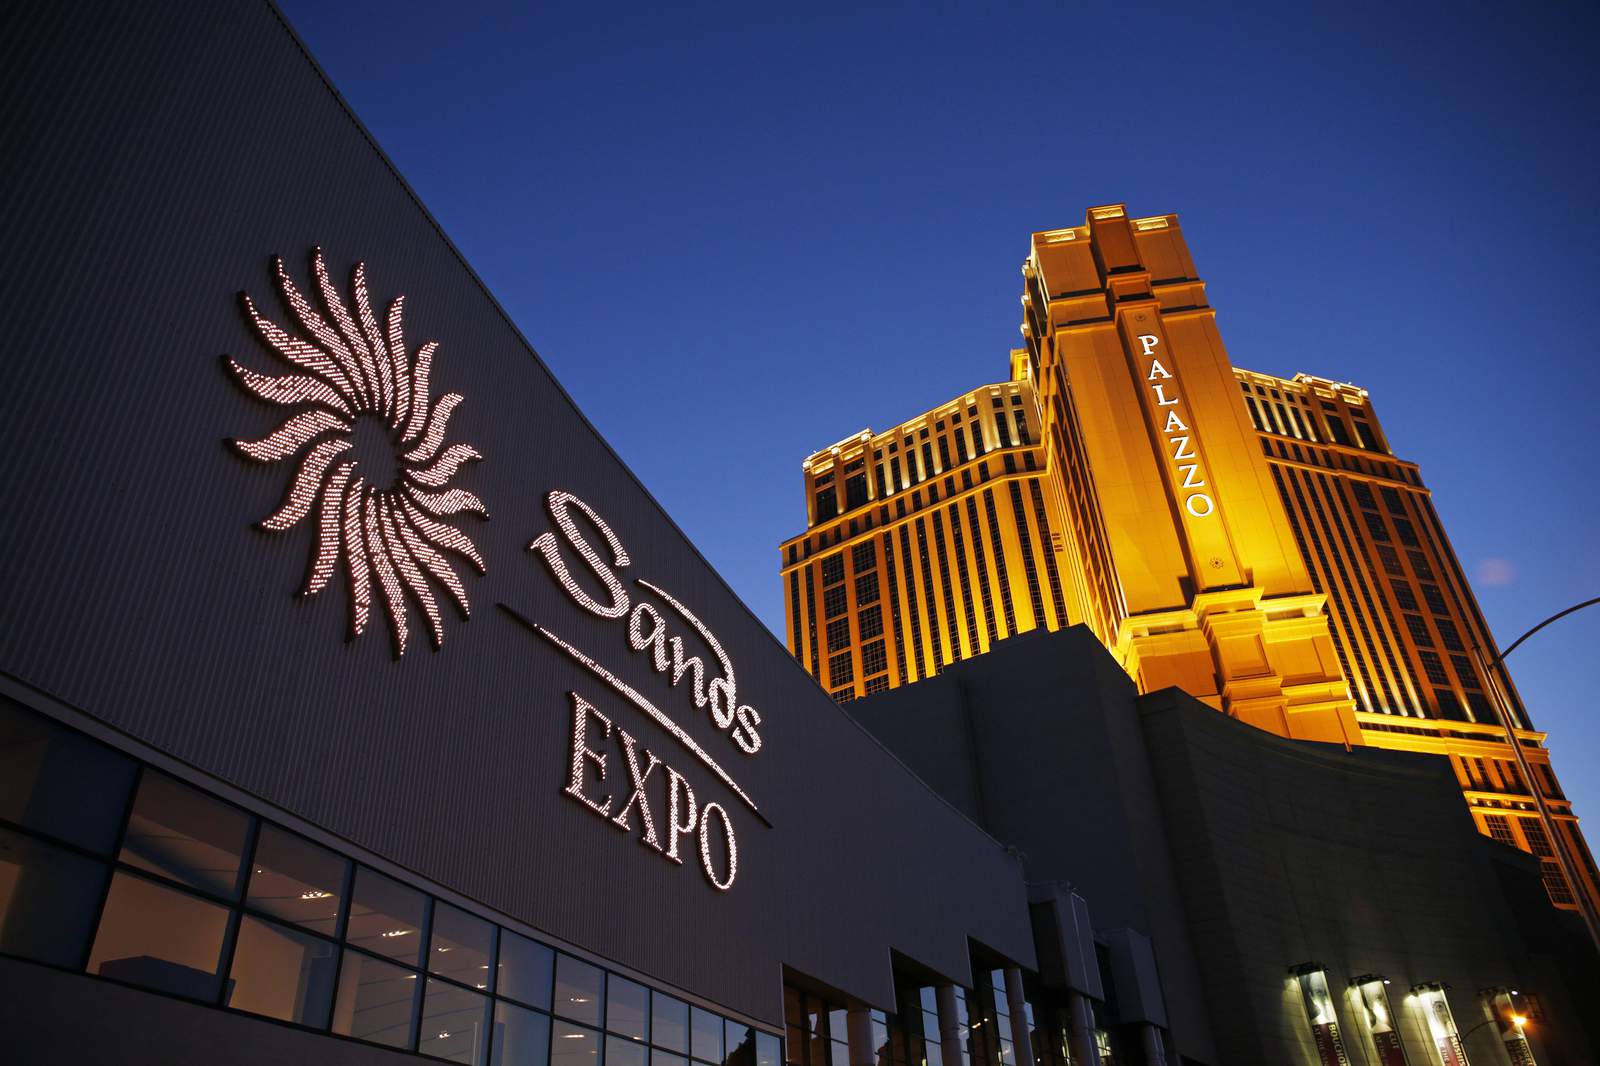 Without Adelson, Las Vegas Sands posts $299 million loss